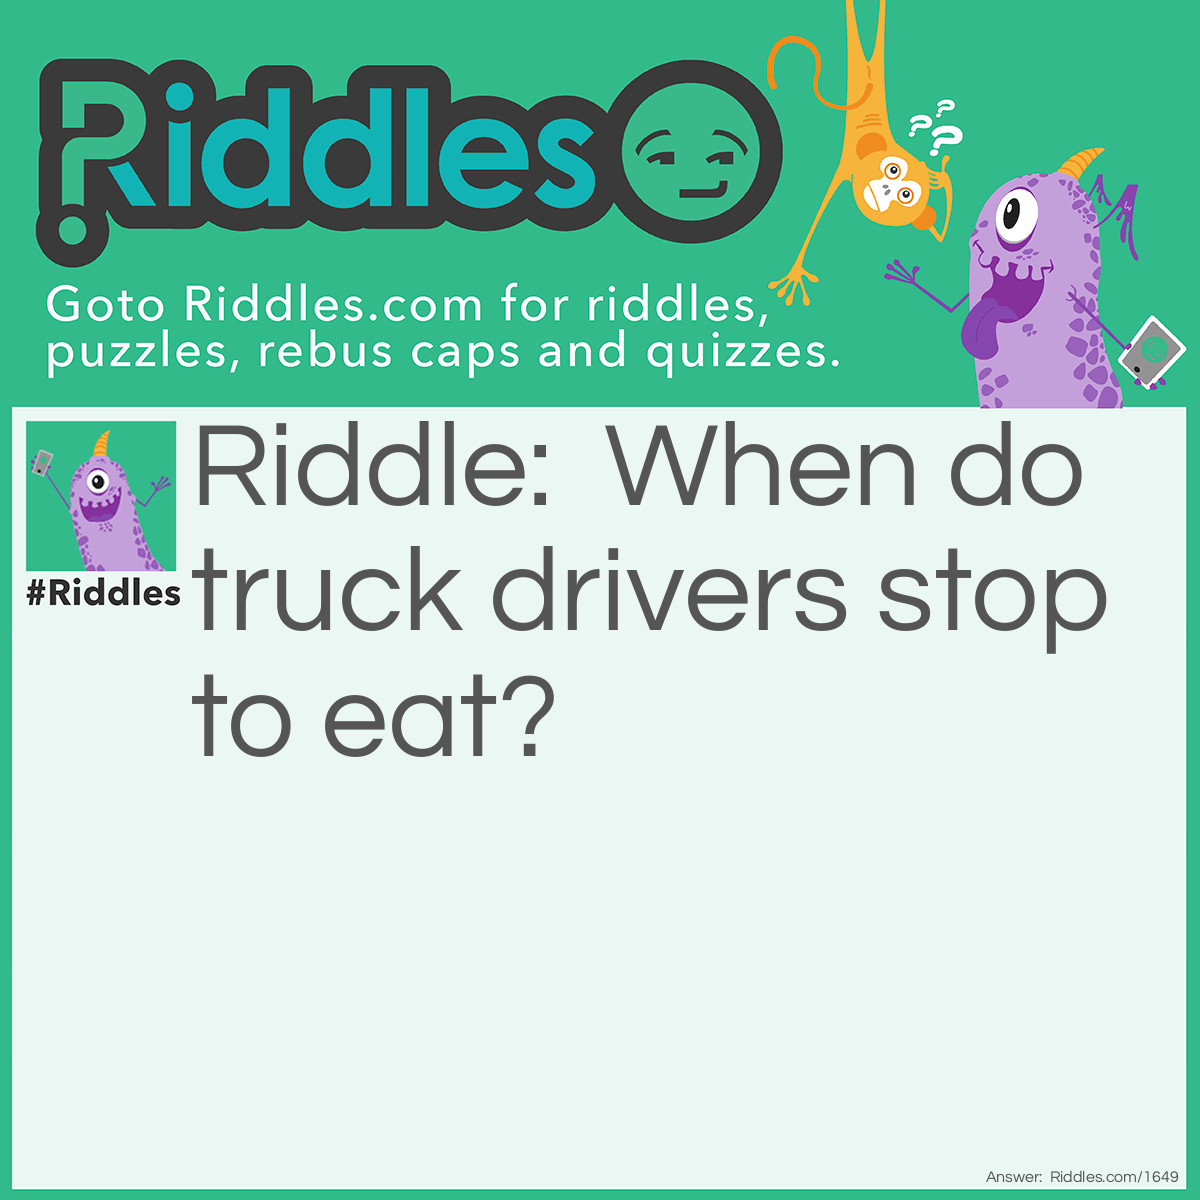 Riddle: When do truck drivers stop to eat? Answer: Whenever they come to a fork in the road.